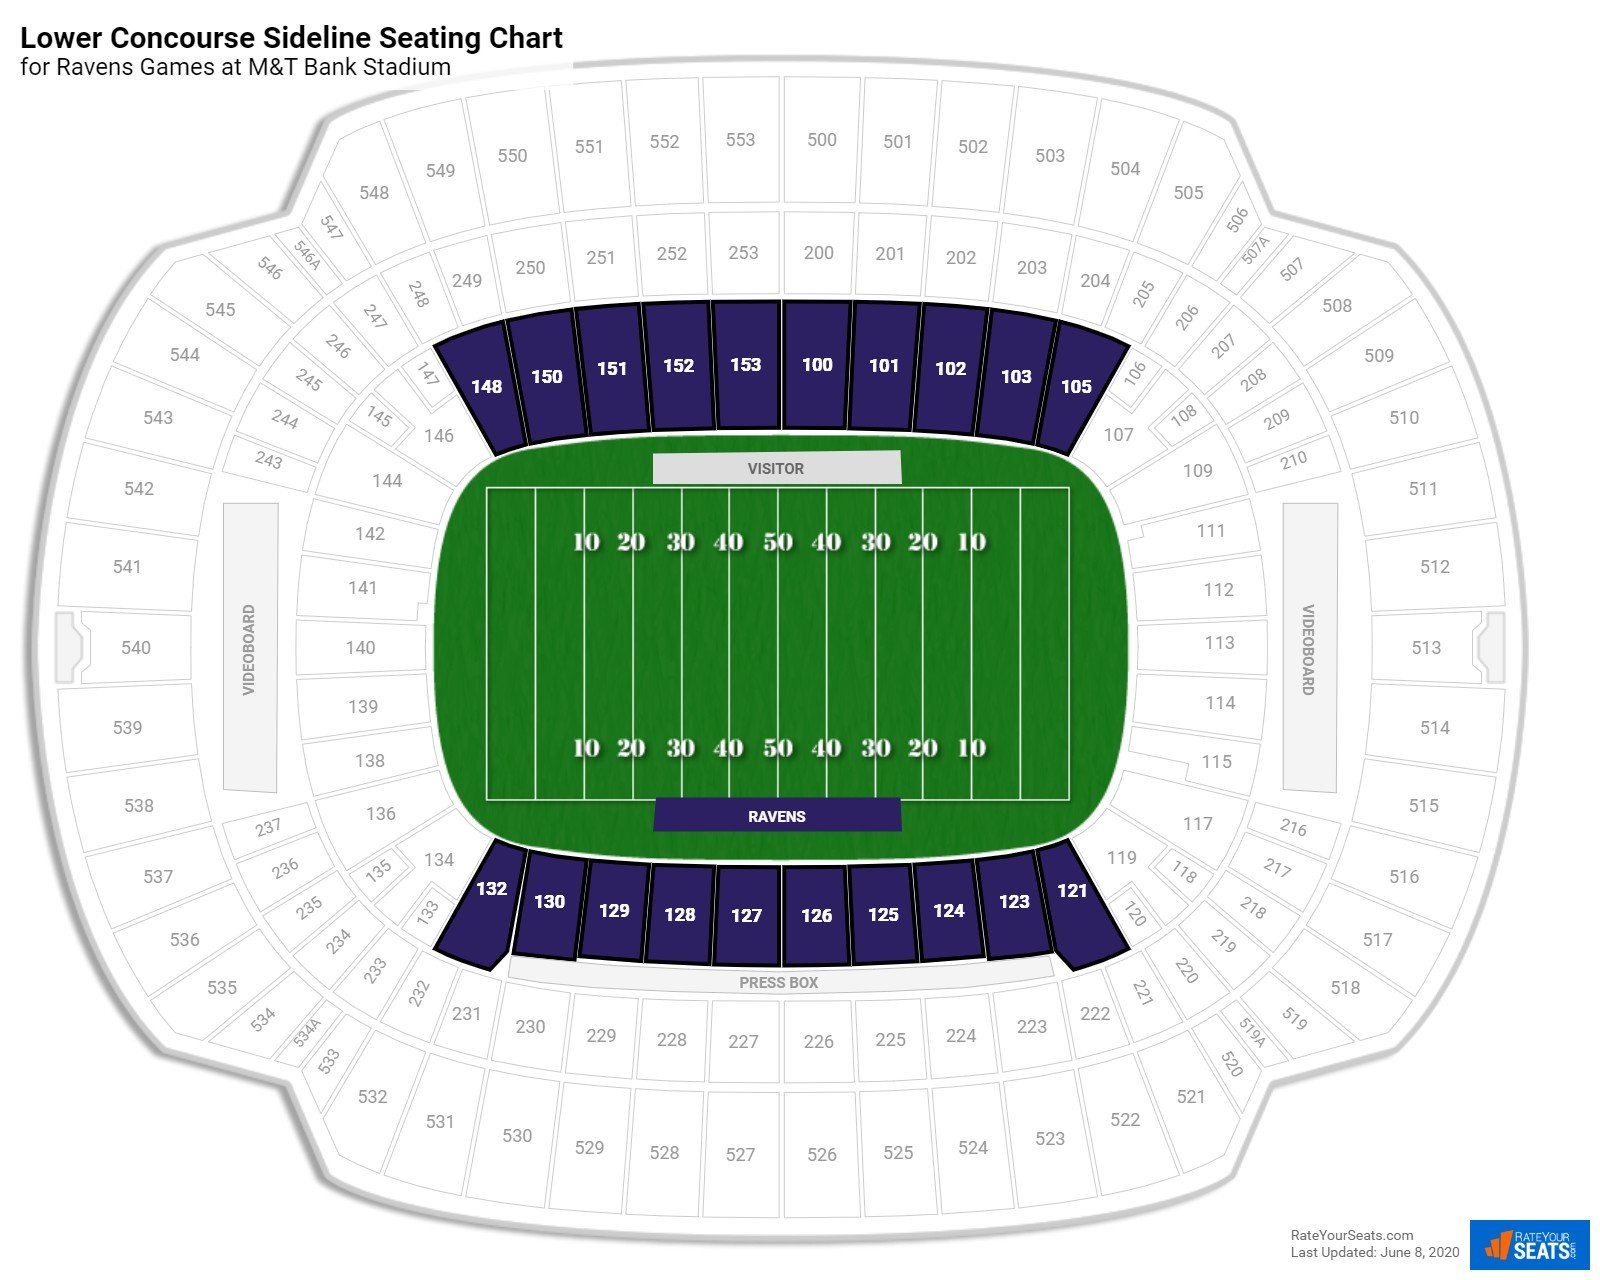 M And T Bank Seating Chart